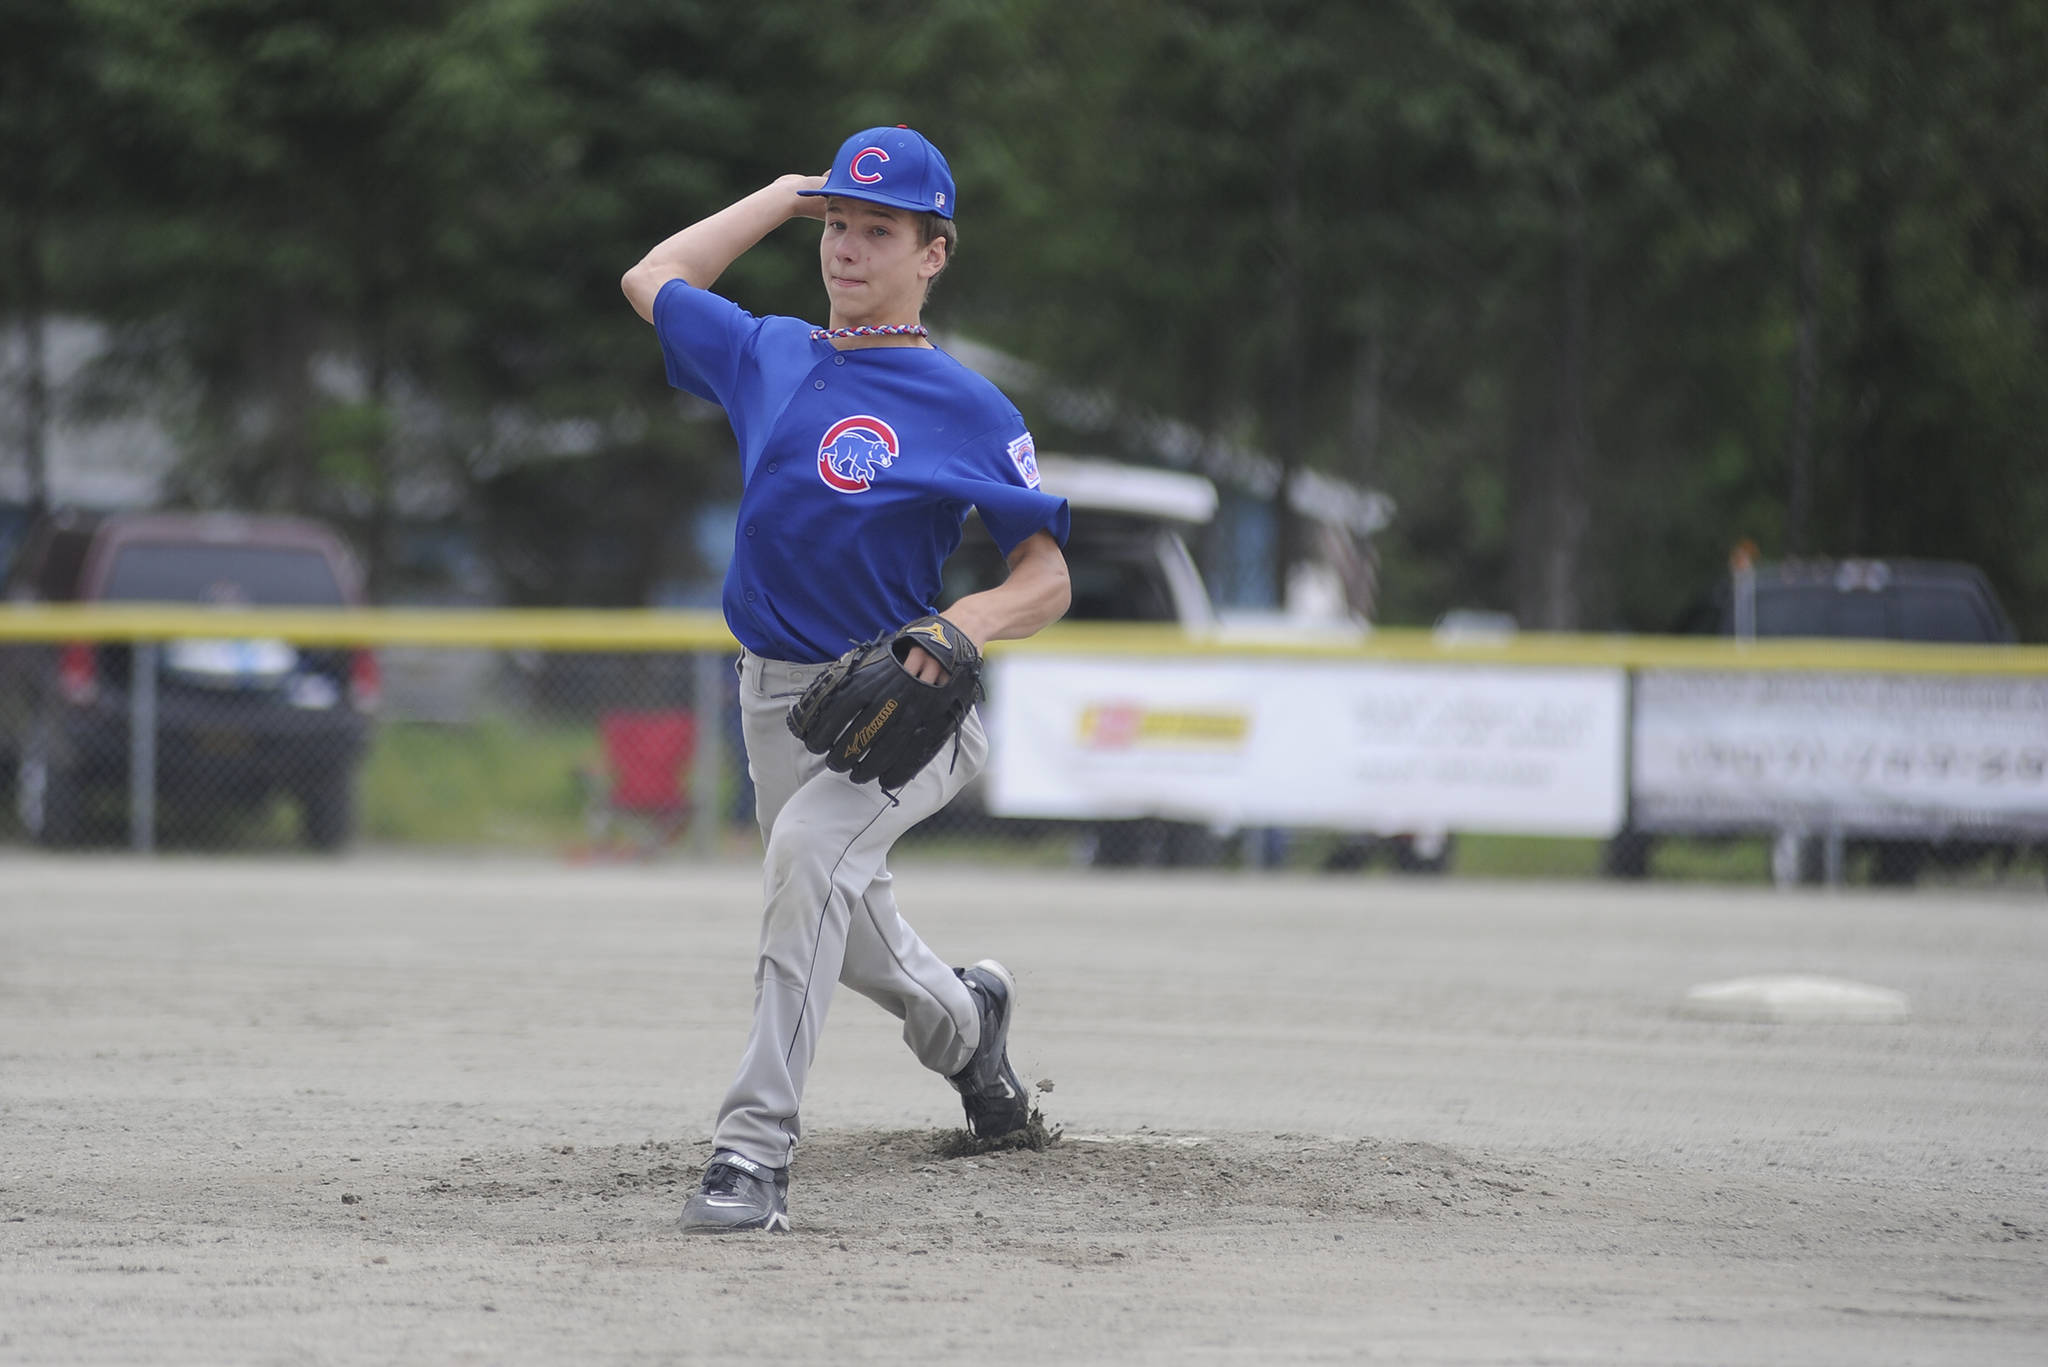 Cubs pitcher Thomas Baxter pitches in the first inning of the Gastineau Channel Little League Major Division Championship game on Saturday. The Cubs won 4-3. (Nolin Ainsworth | Juneau Empire)